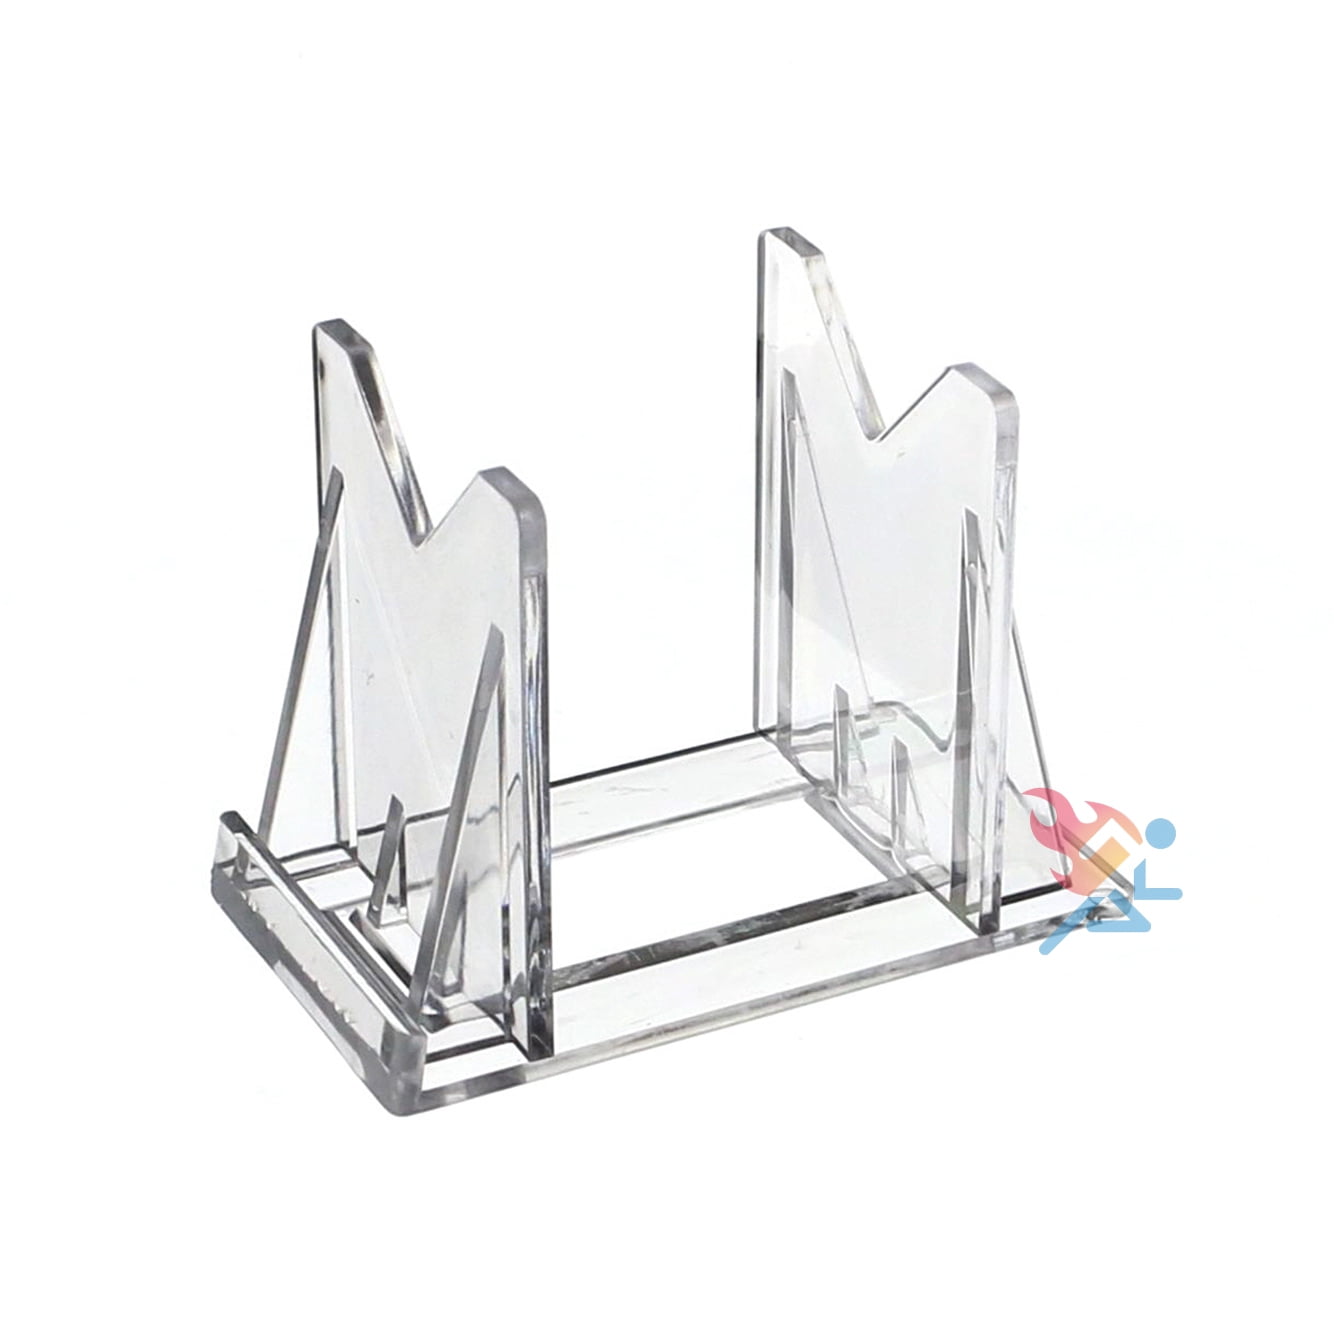 1pcs Fishing Lure Display Stand Easels Small Commodity V4A0 Stand Display C9F7 